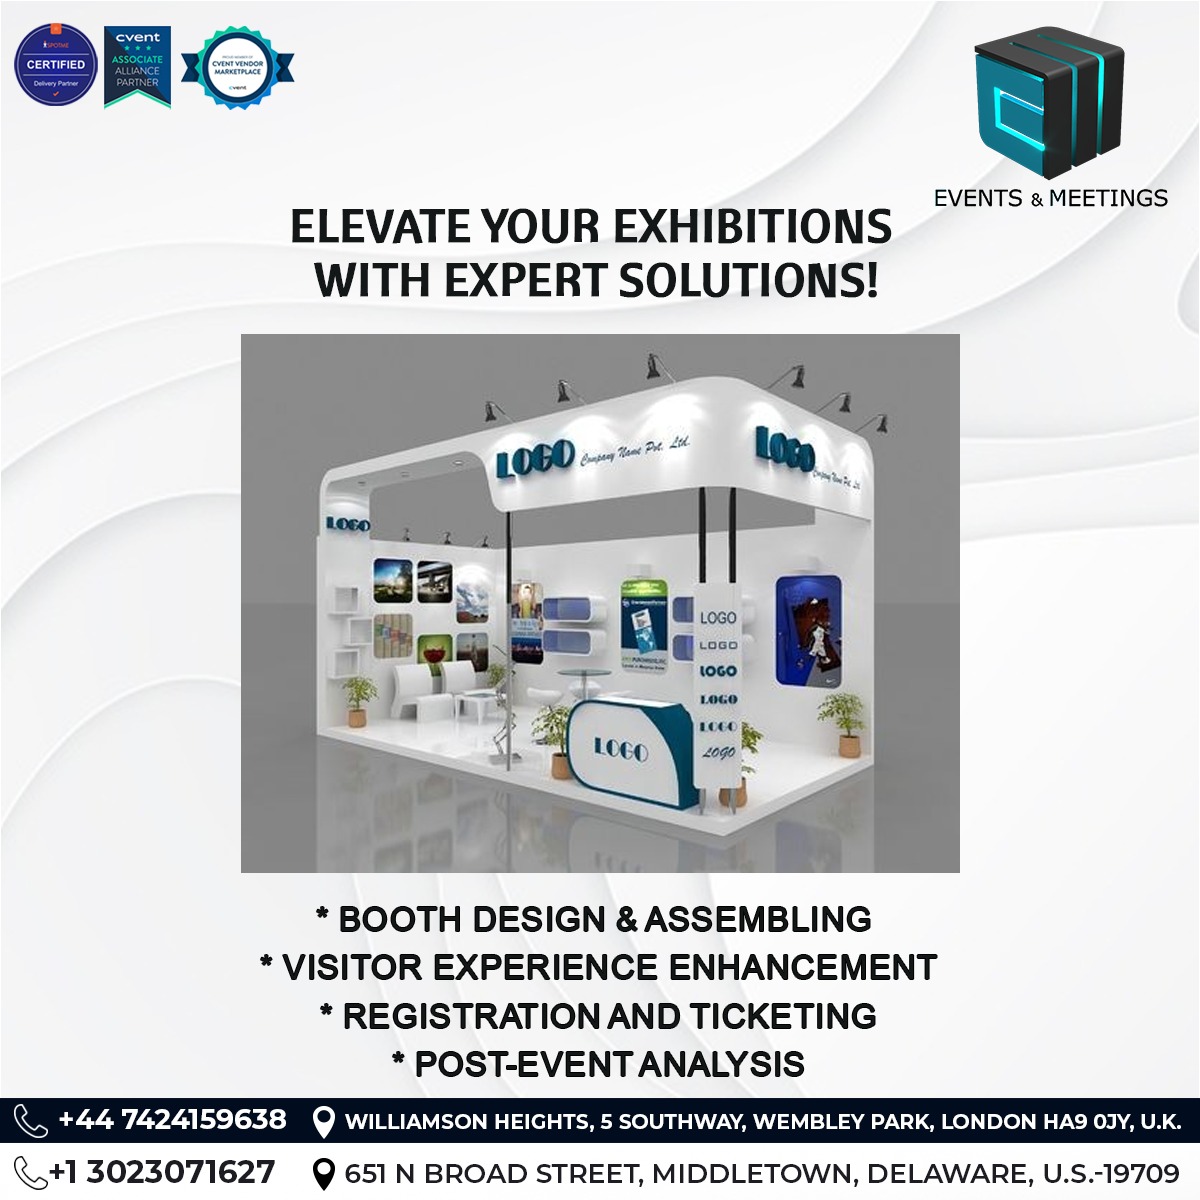 Transform your exhibitions into unforgettable experiences with our expert solutions! 

🌐 eventsandmeetings.co

#ExhibitionExperts #TechForEvents #EventExcellence #cvent #spotme #eventtechsolutions #eventsandmeetings